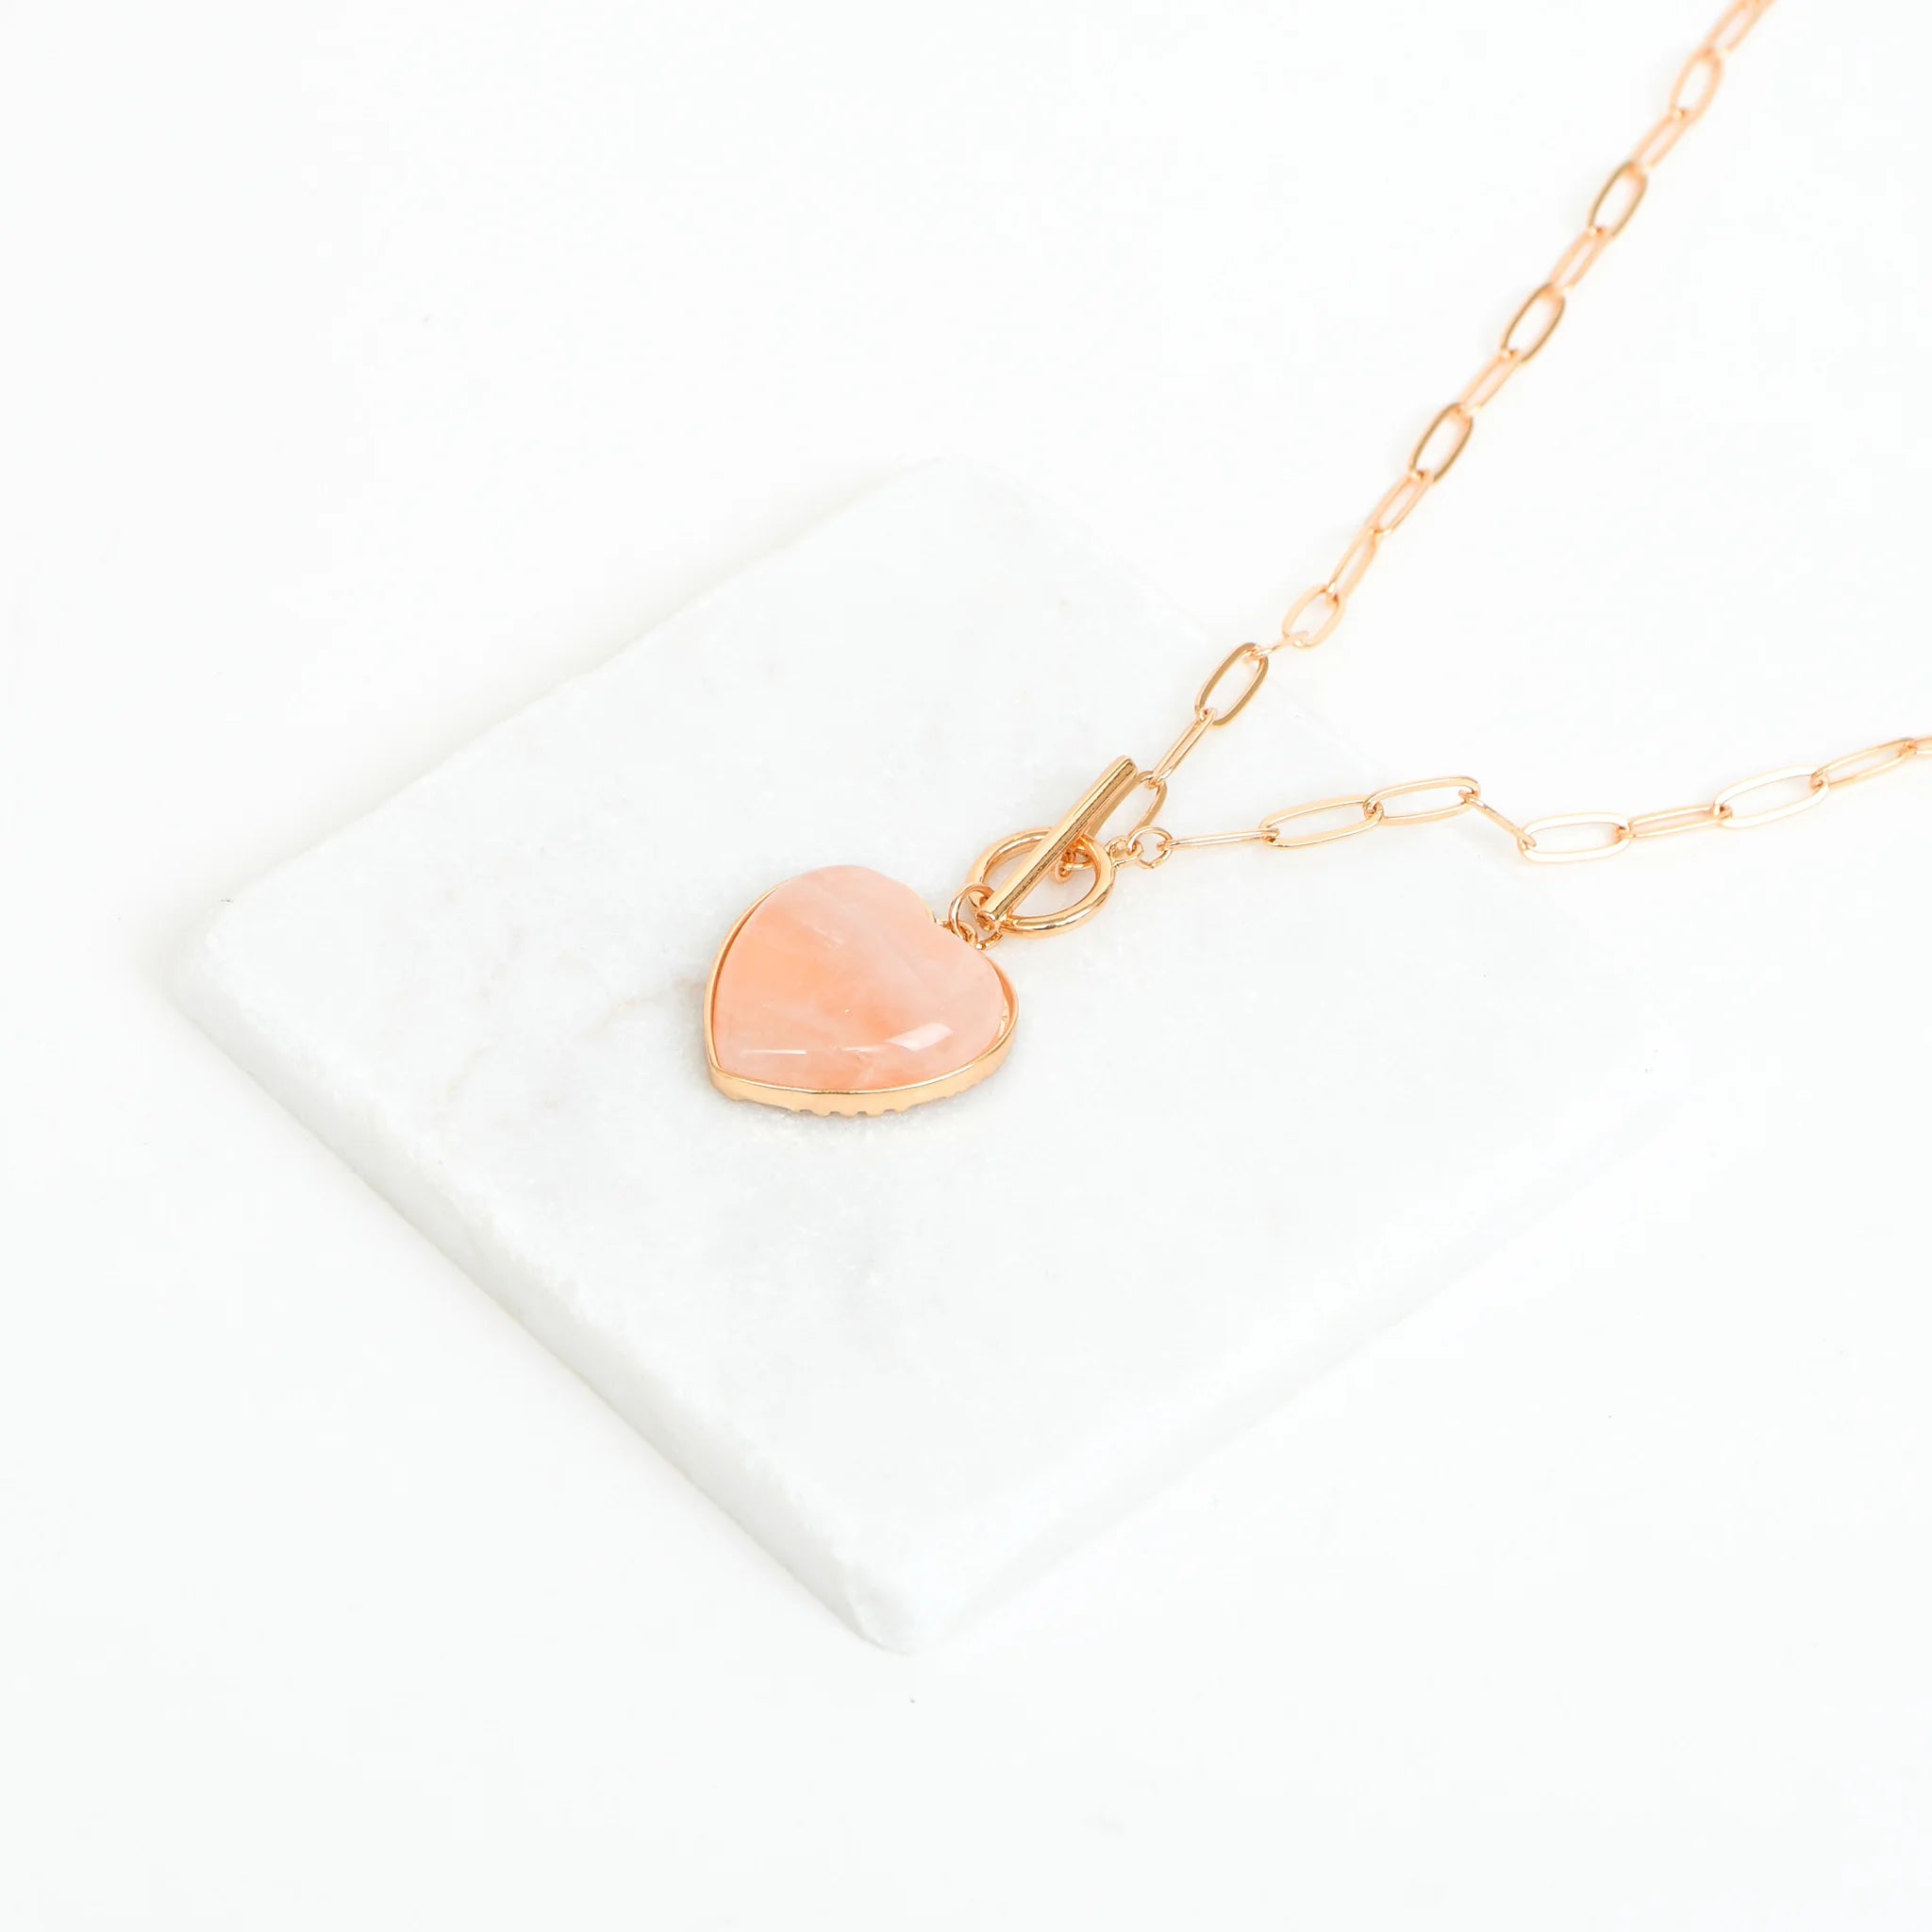 Chain Necklace with Heart Shaped Natural Stone Pendant